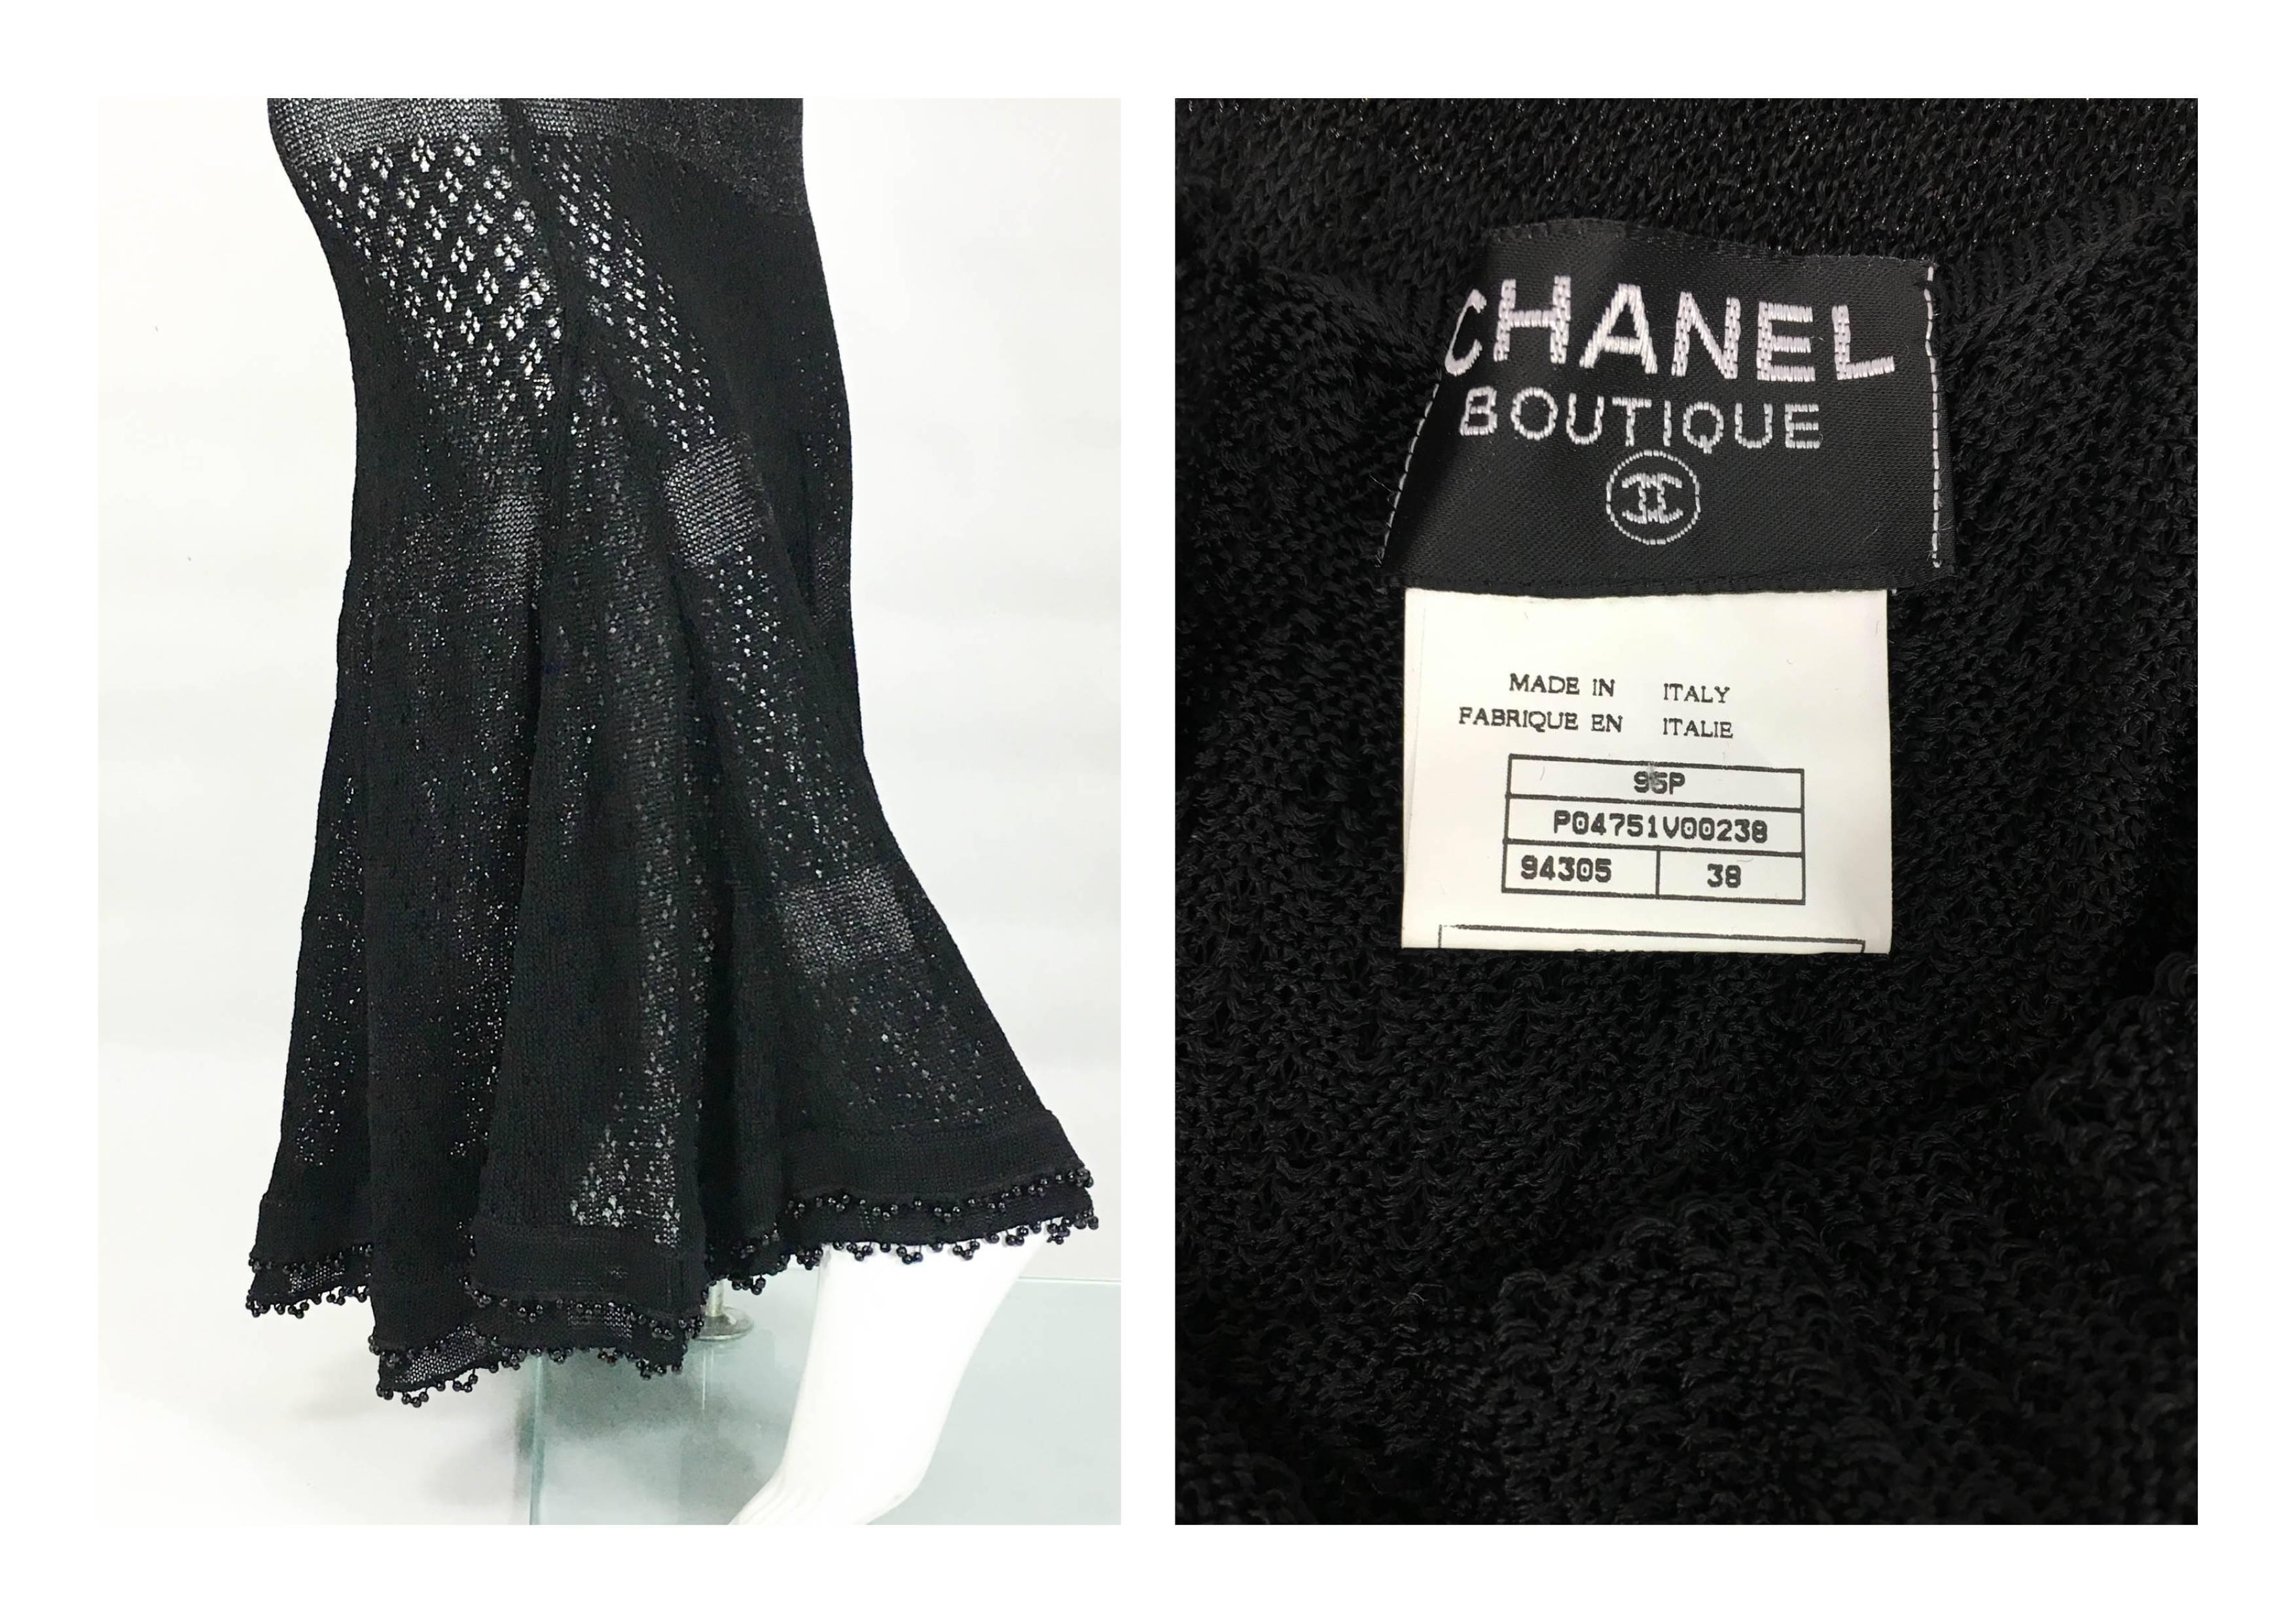 Chanel Runway and Campaign Sheer Knitted Dress With Pearl Embellishment - 1995 3